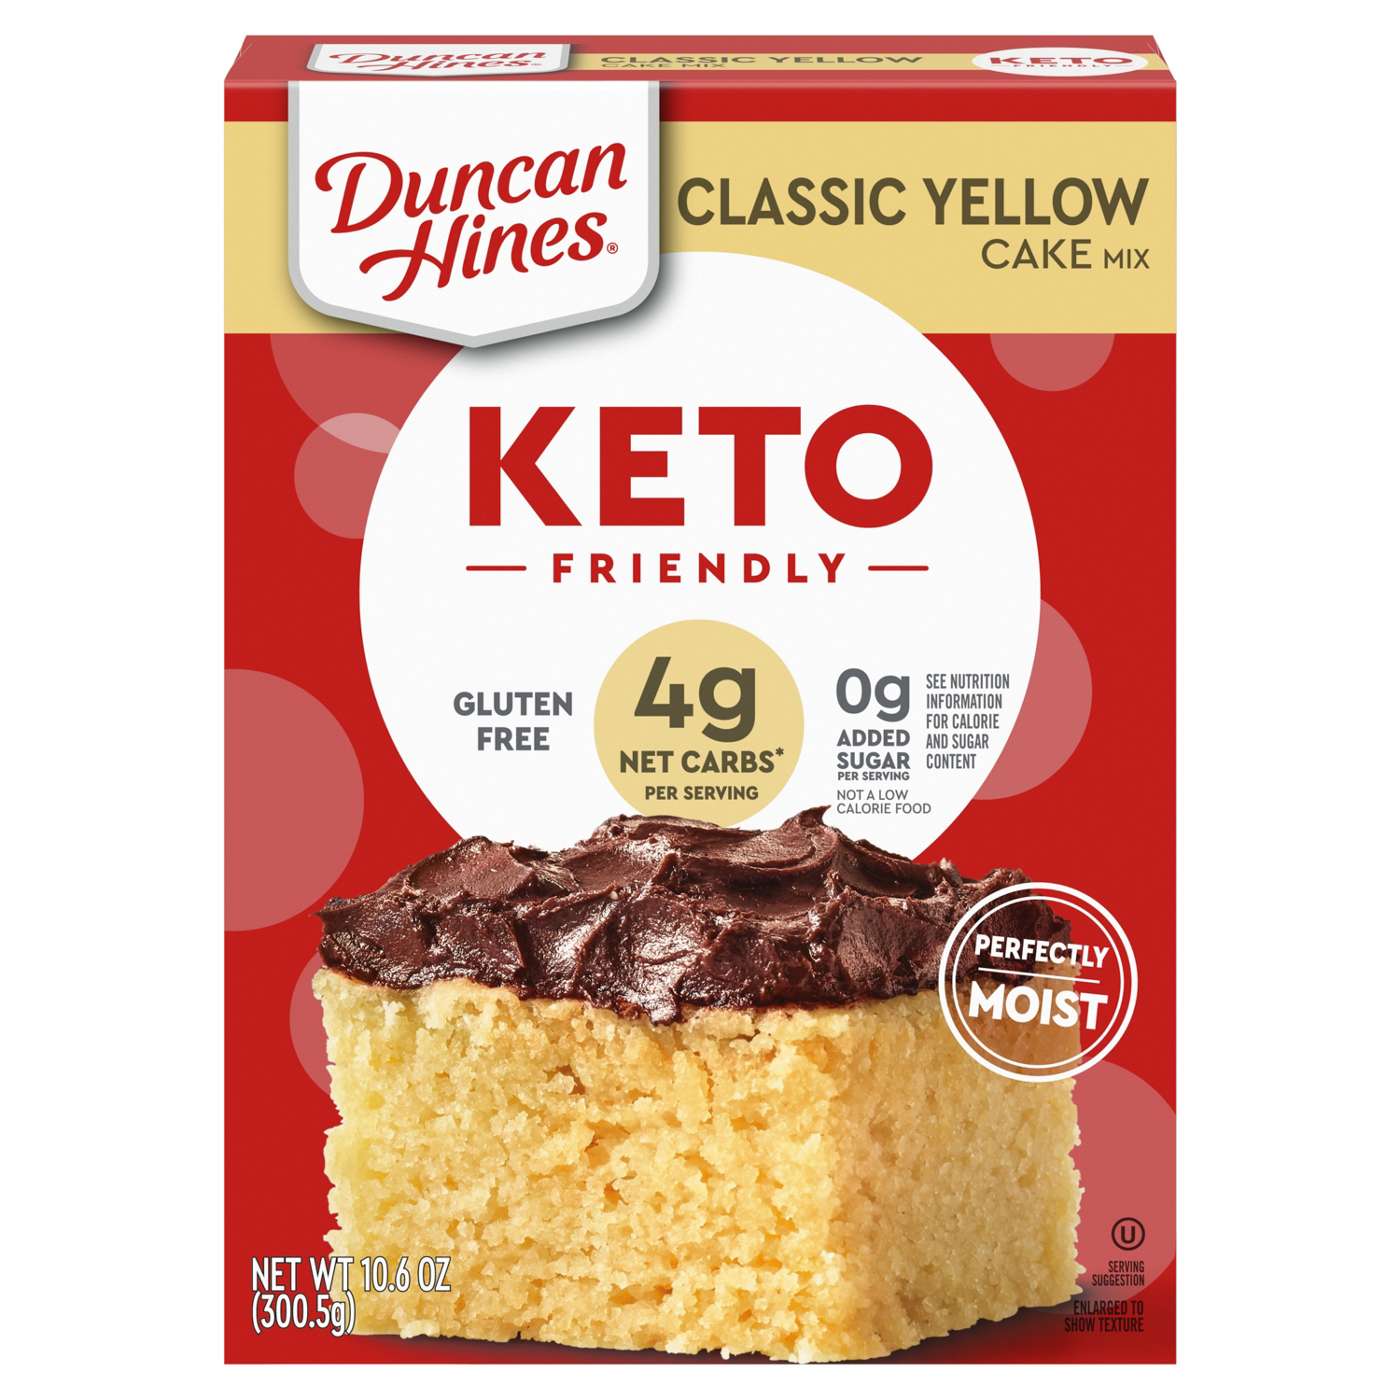 Duncan Hines Keto Friendly Gluten Free Classic Yellow Cake Mix; image 1 of 7